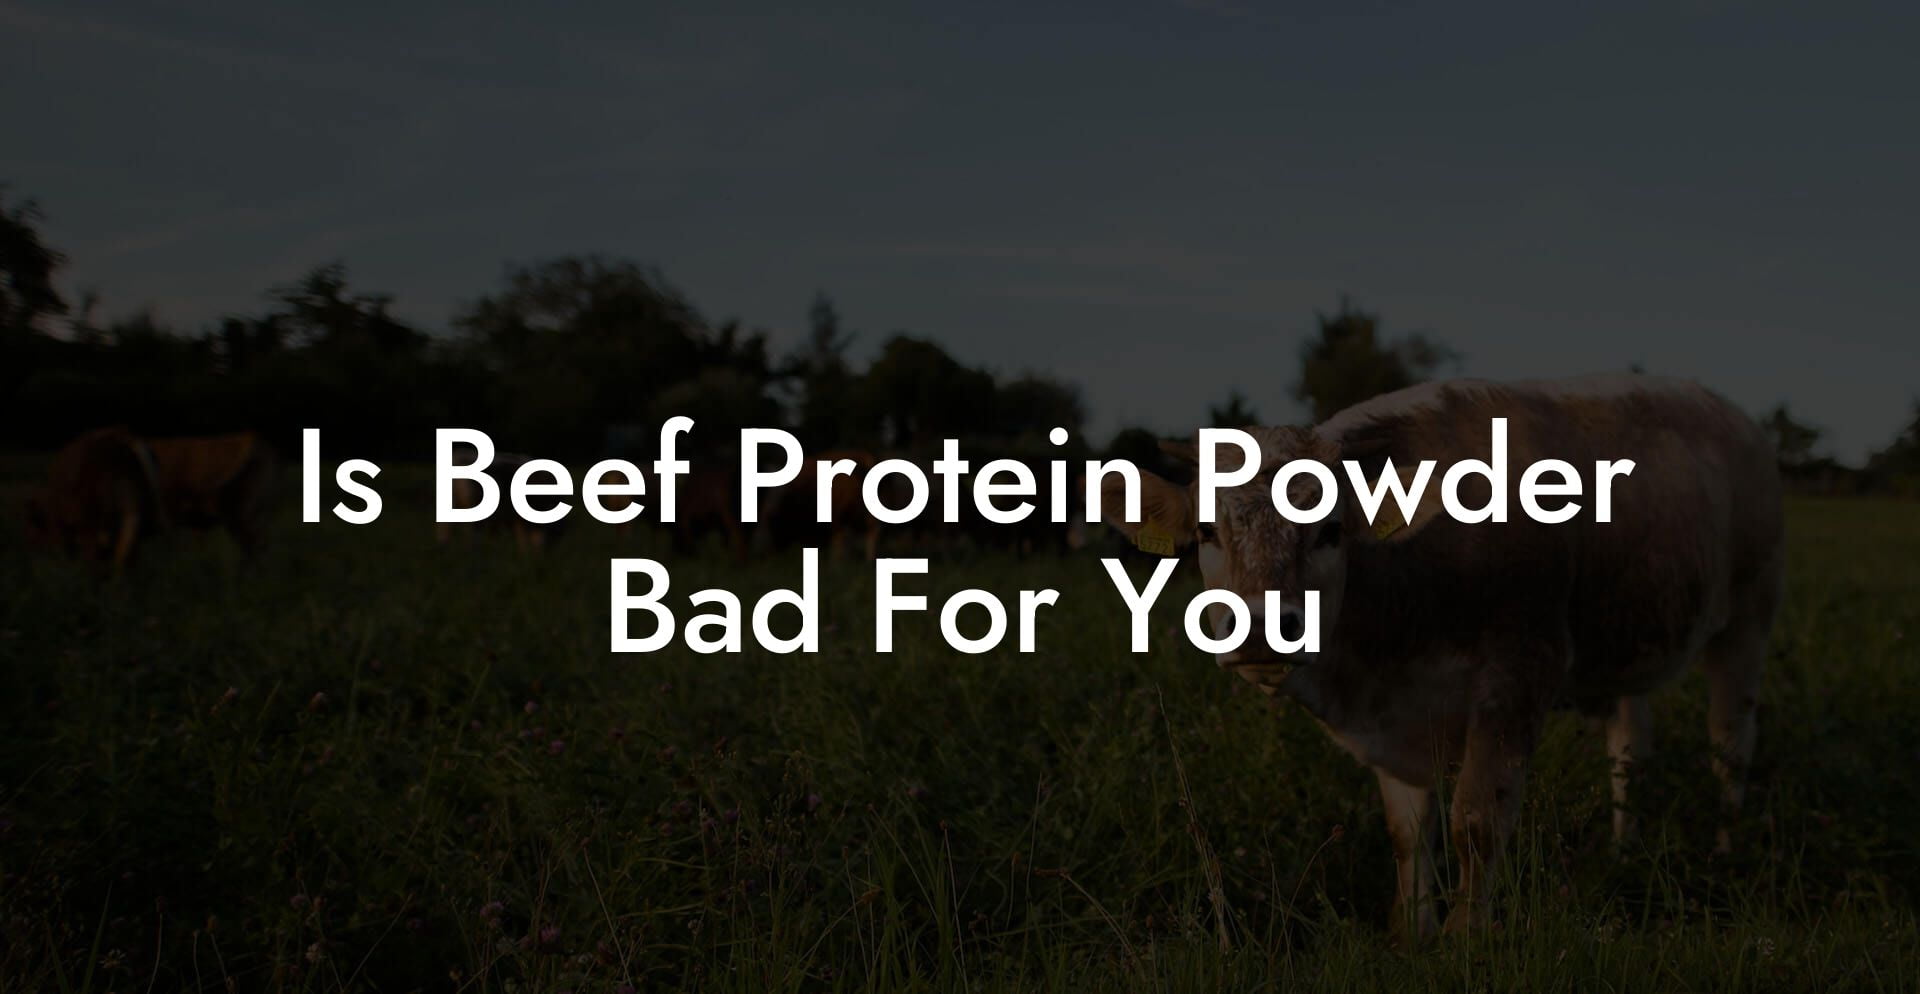 Is Beef Protein Powder Bad For You